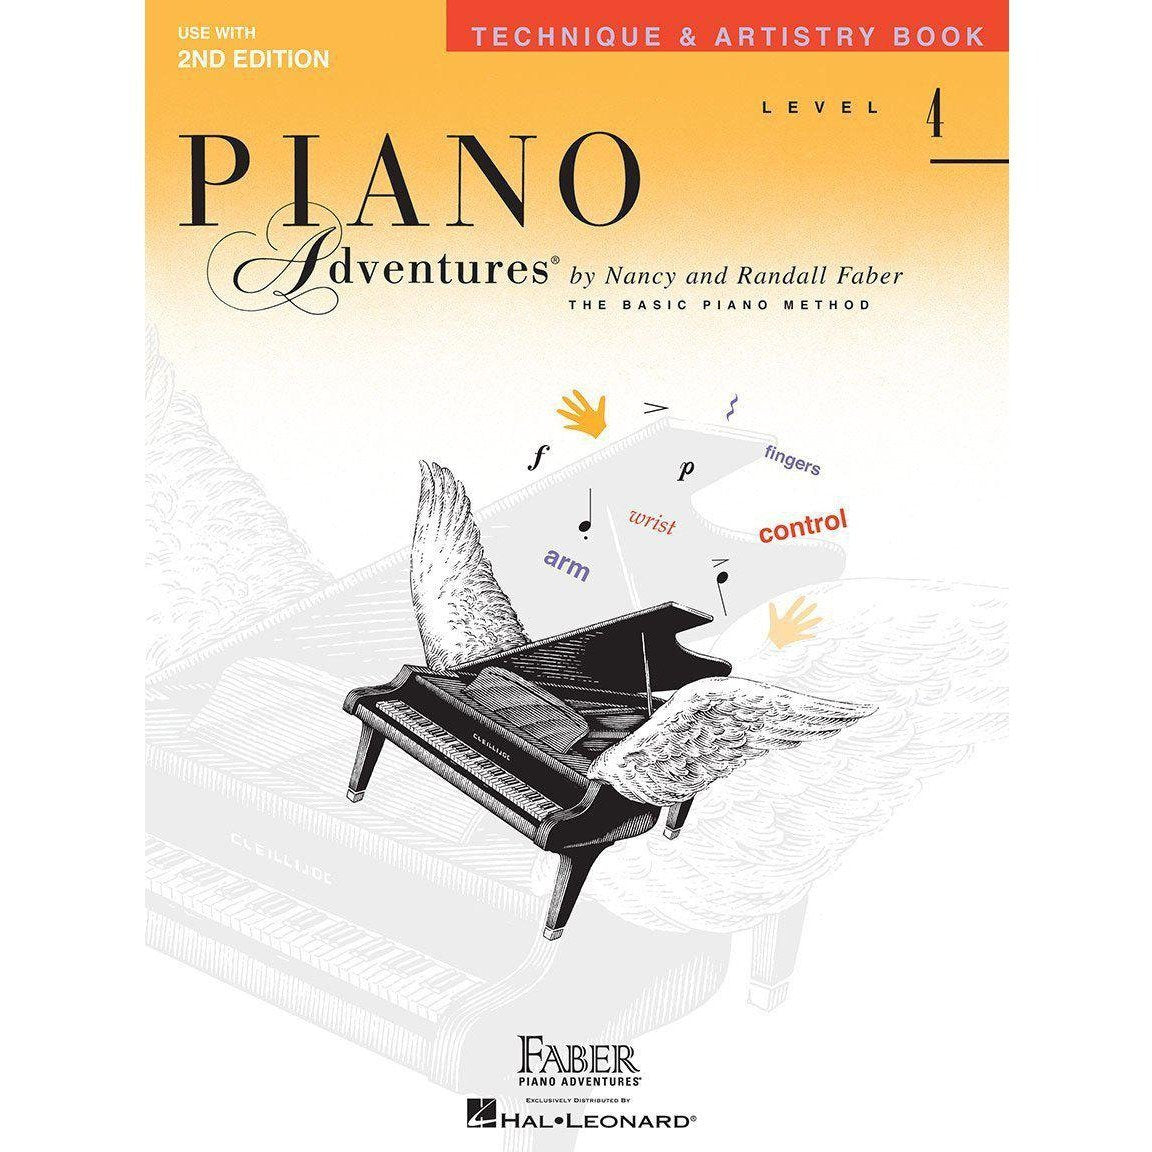 Faber Piano Adventures-4-Tech & Artistry-Andy's Music